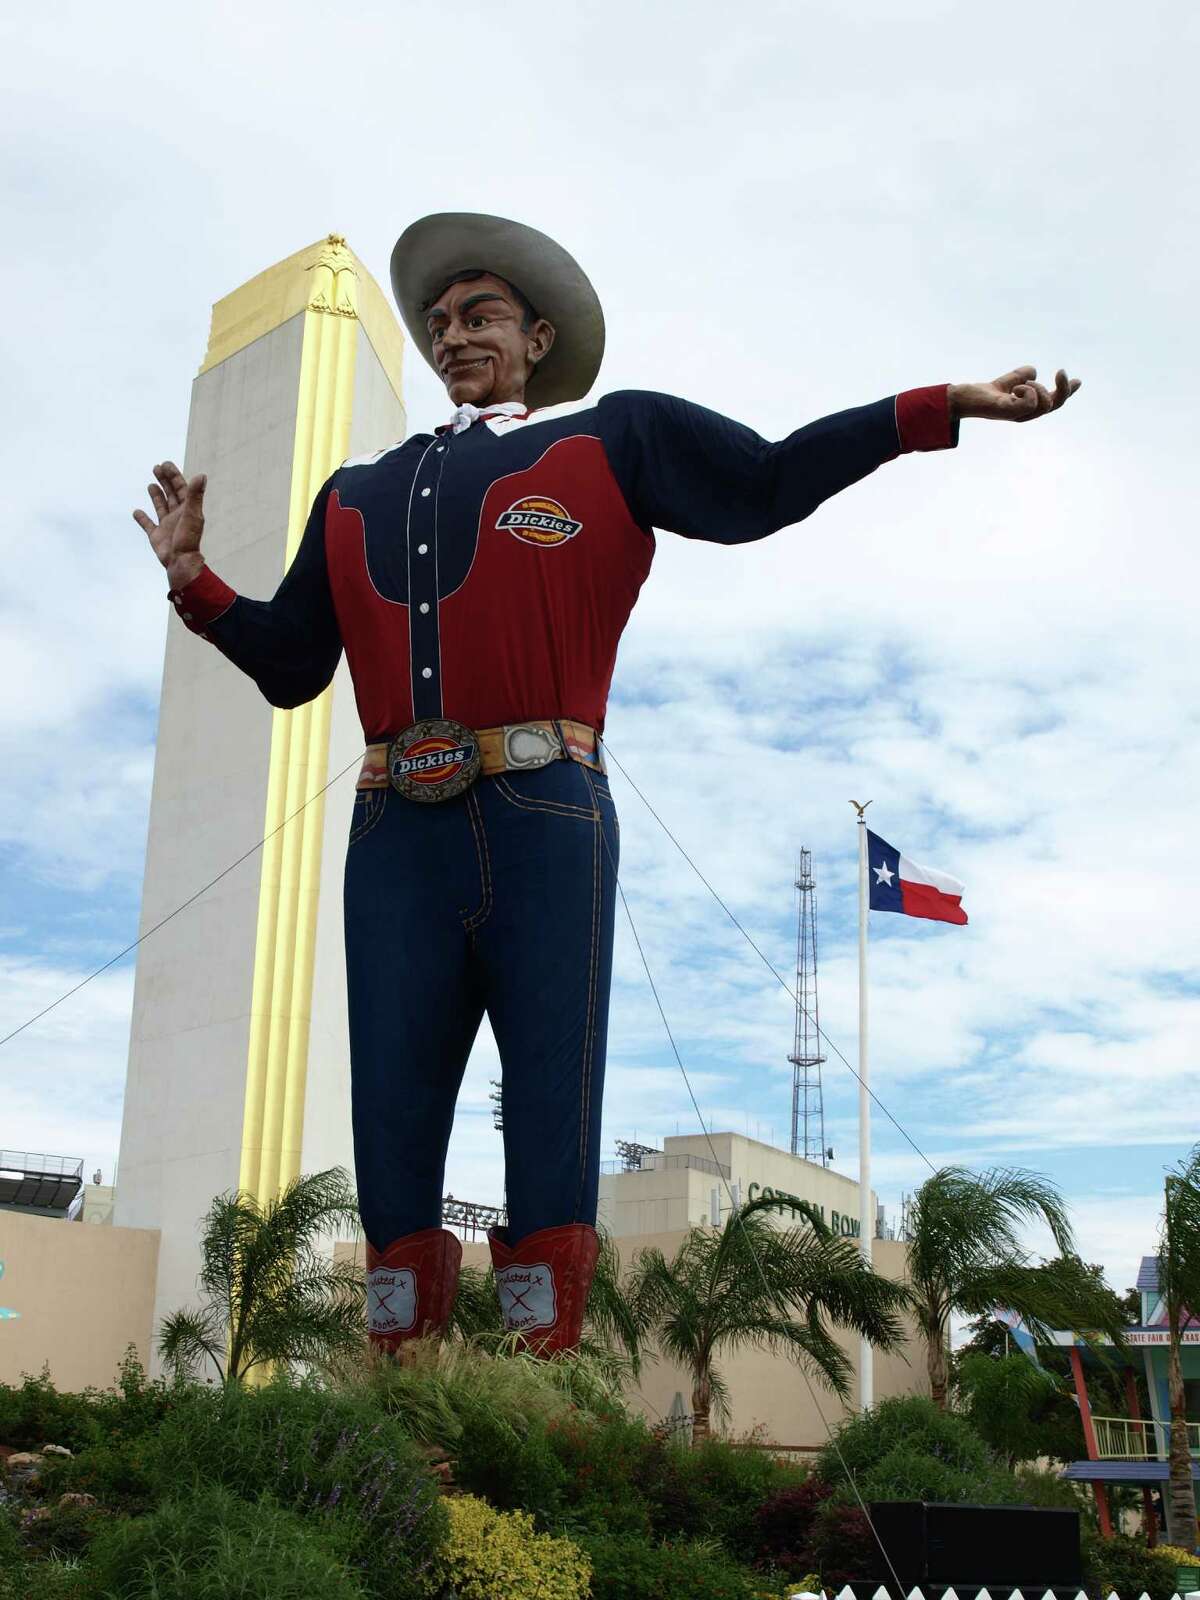 Big Tex weighs-in at 6,000 pounds and is 52 feet tall. He wears a 75-gallon hat and size 70 boots.